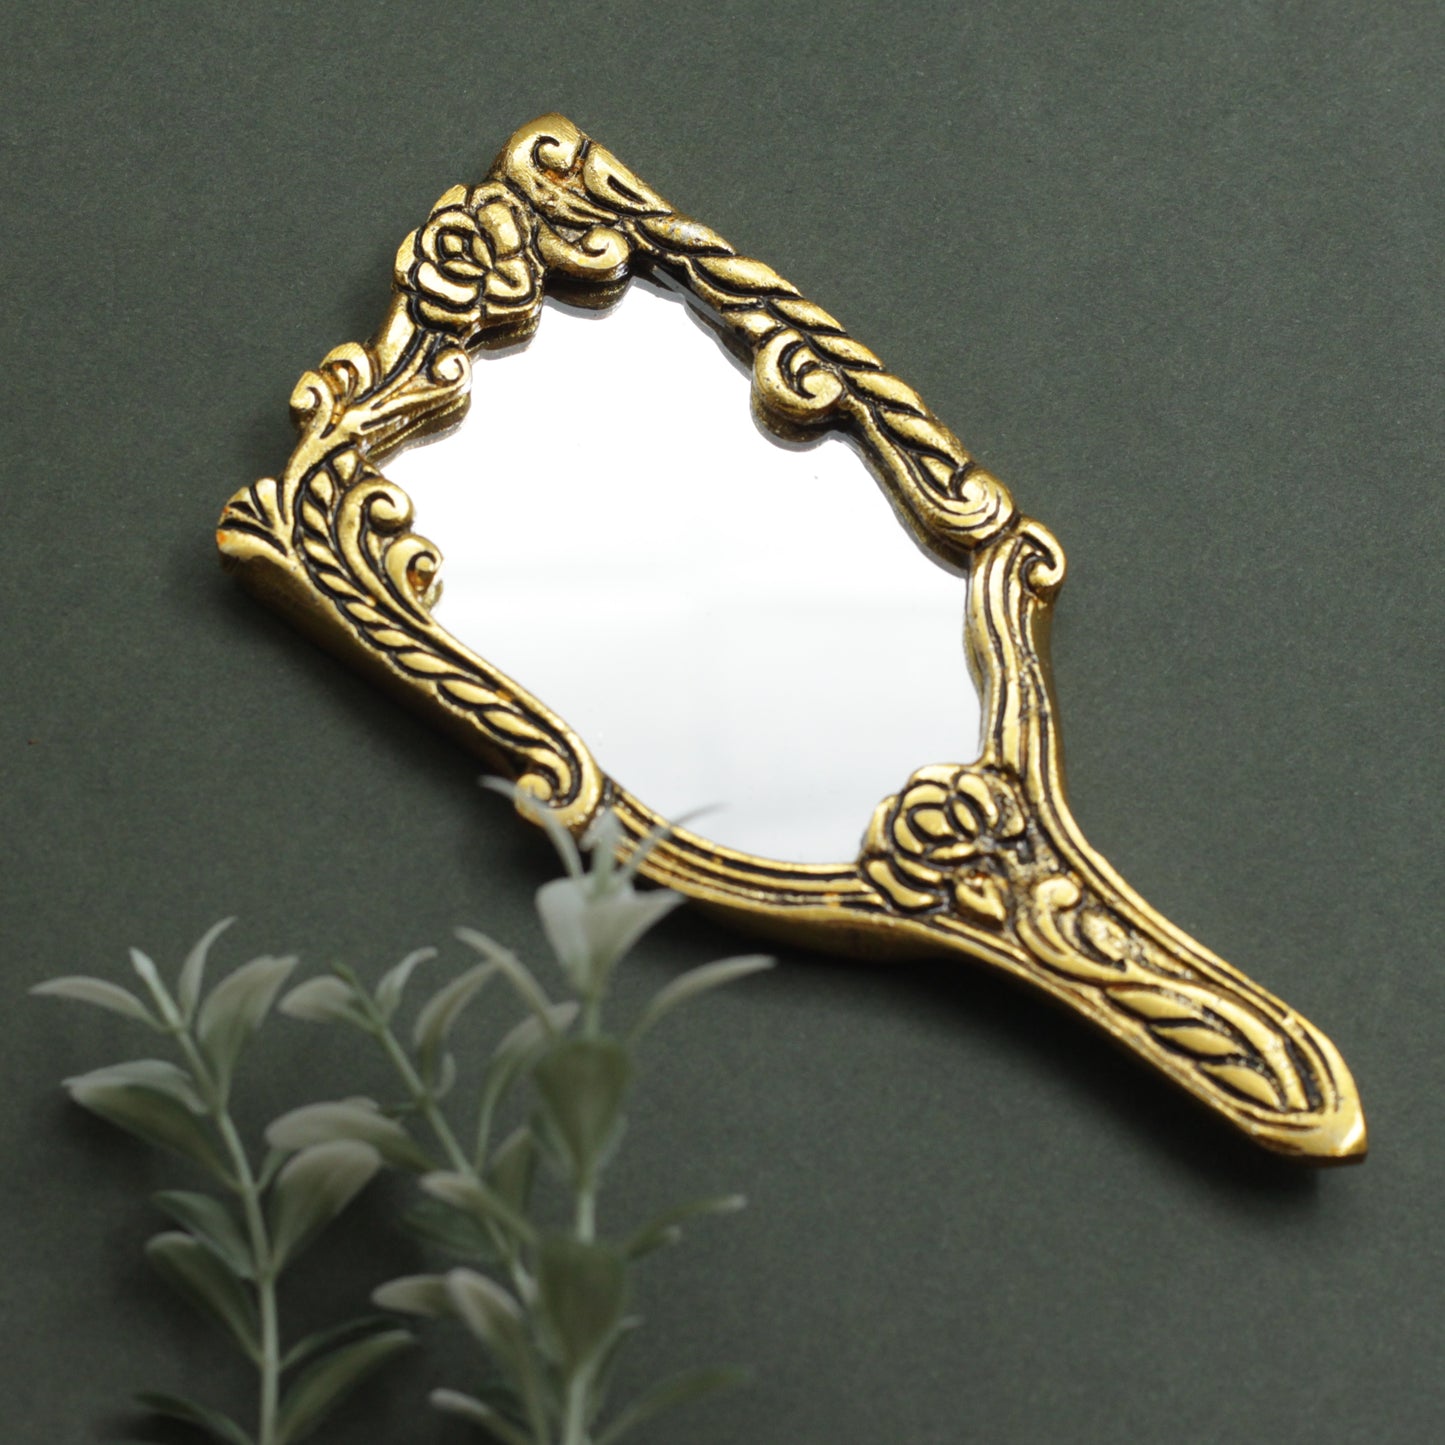 Antique Gold Vintage Metal Base Small Hand Mirror